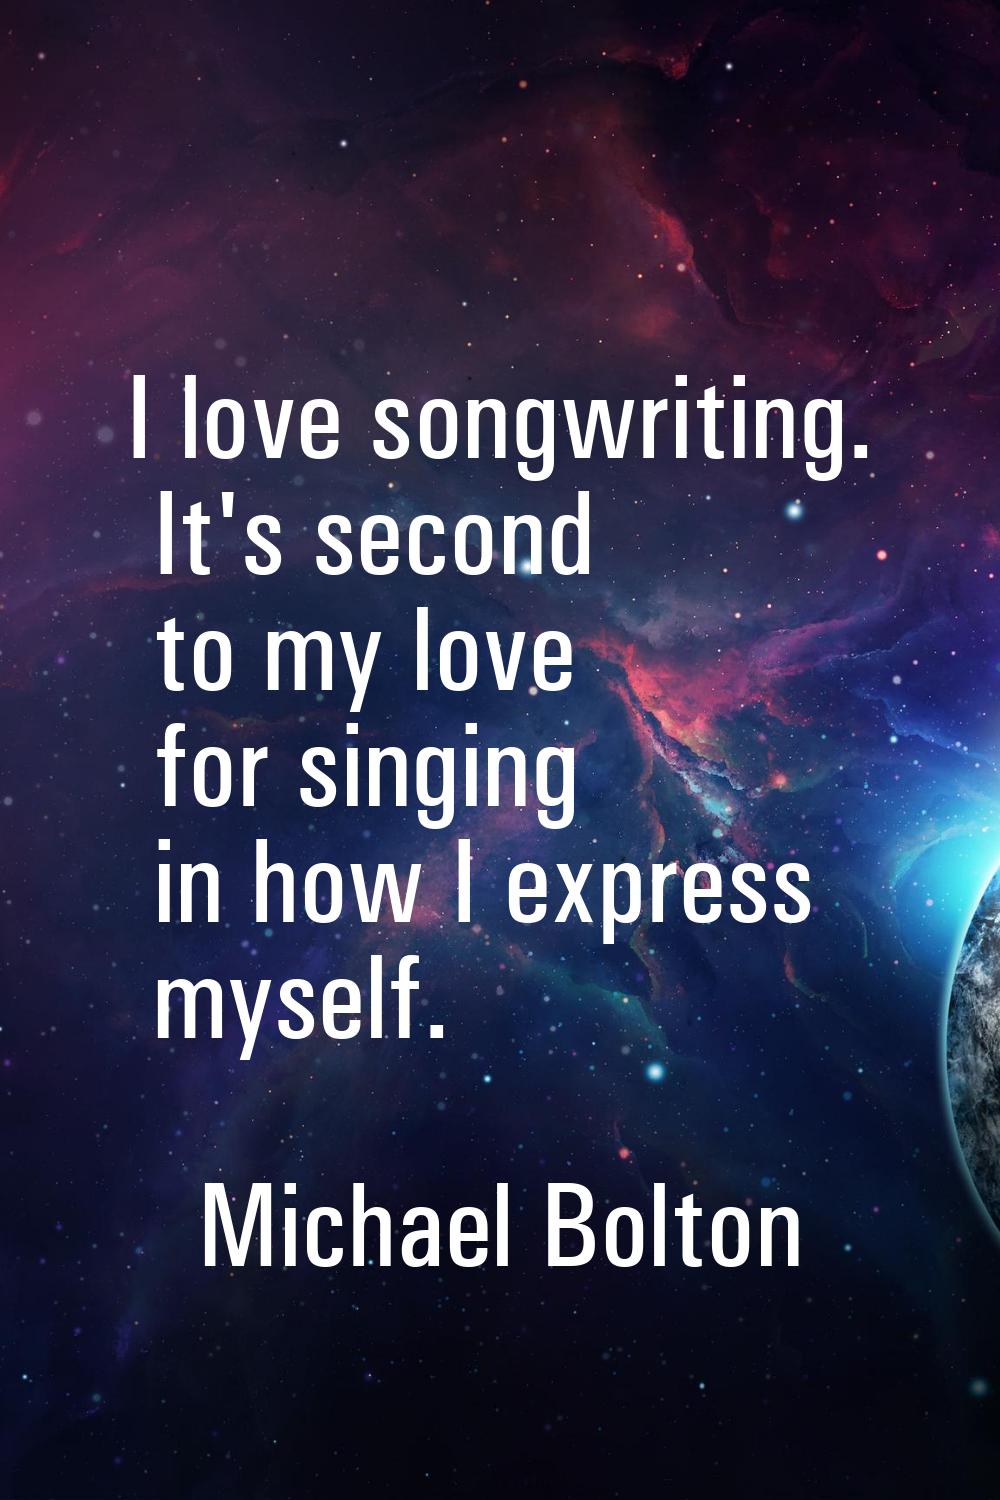 I love songwriting. It's second to my love for singing in how I express myself.